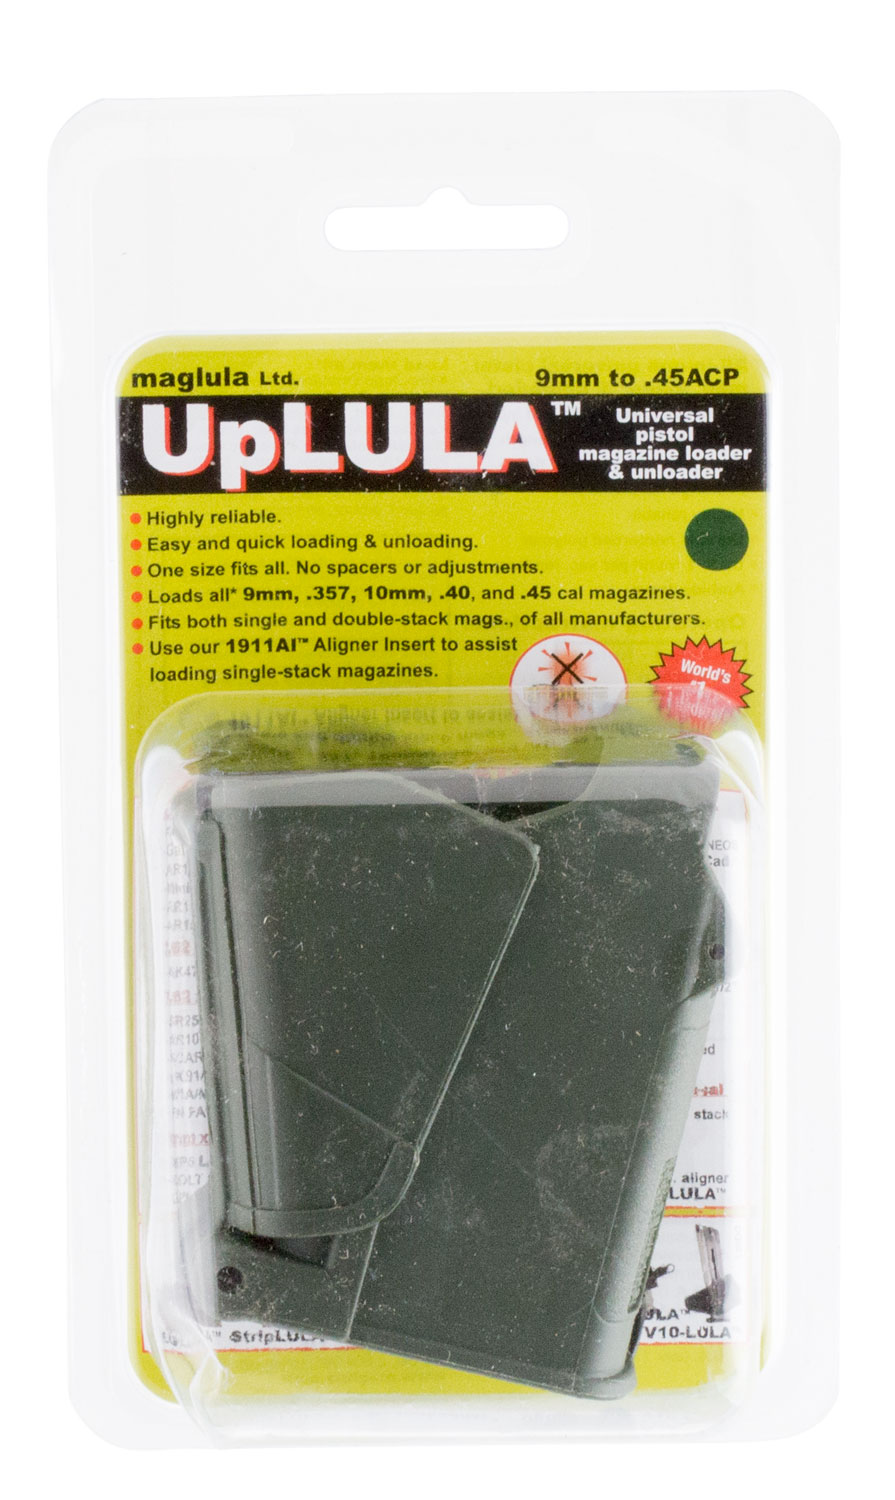 Maglula UP60DG UpLULA Loader & Unloader Double & Single Stack Style made of Polymer with Dark Green Finish for 9mm Luger, 45 ACP Pistols